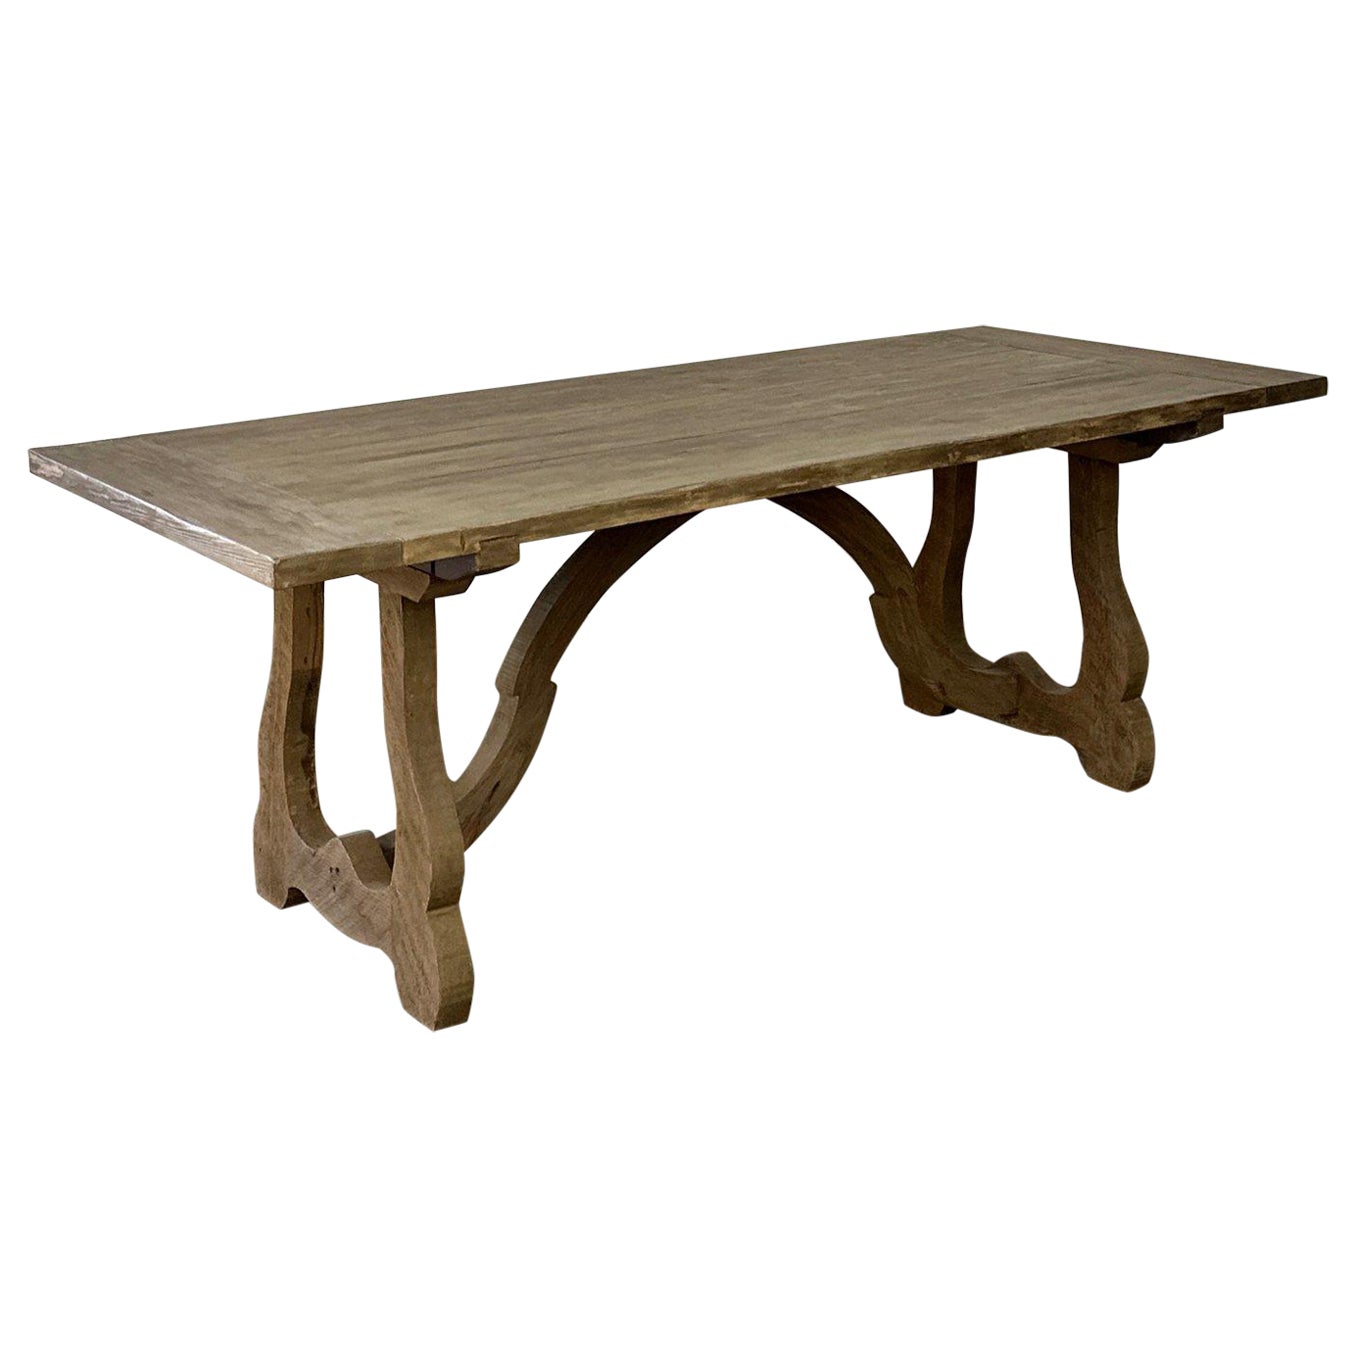 Distressed Reclaimed Pine Dining table